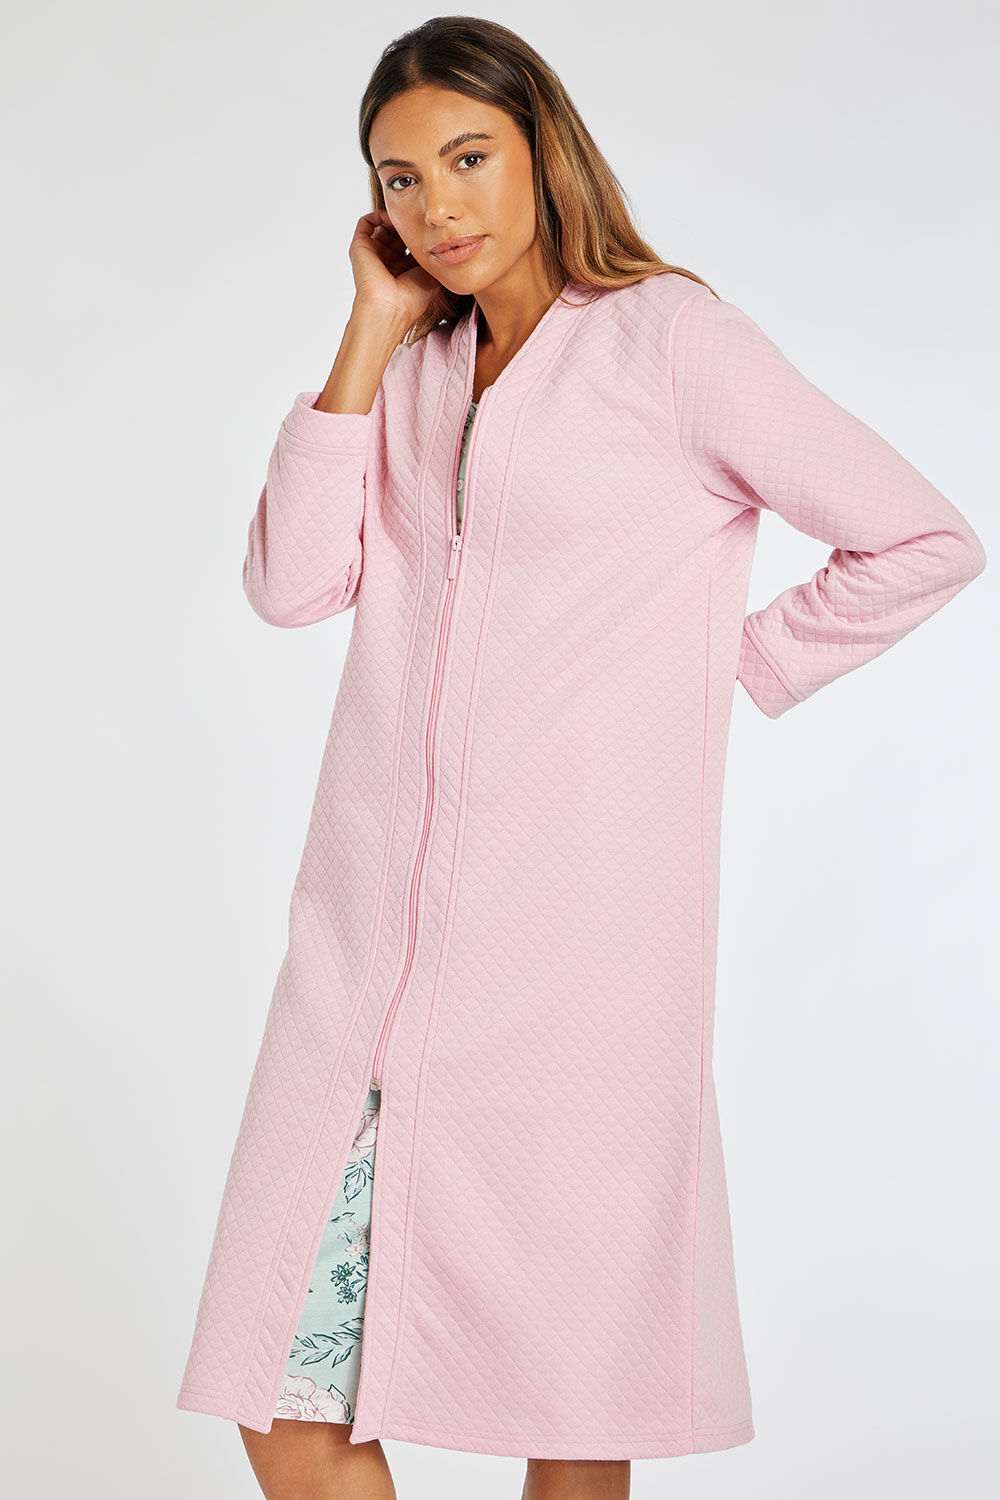 Bonmarche Pink Diamond Quilted Robe With Zip Through Fastening, Size: 12-14